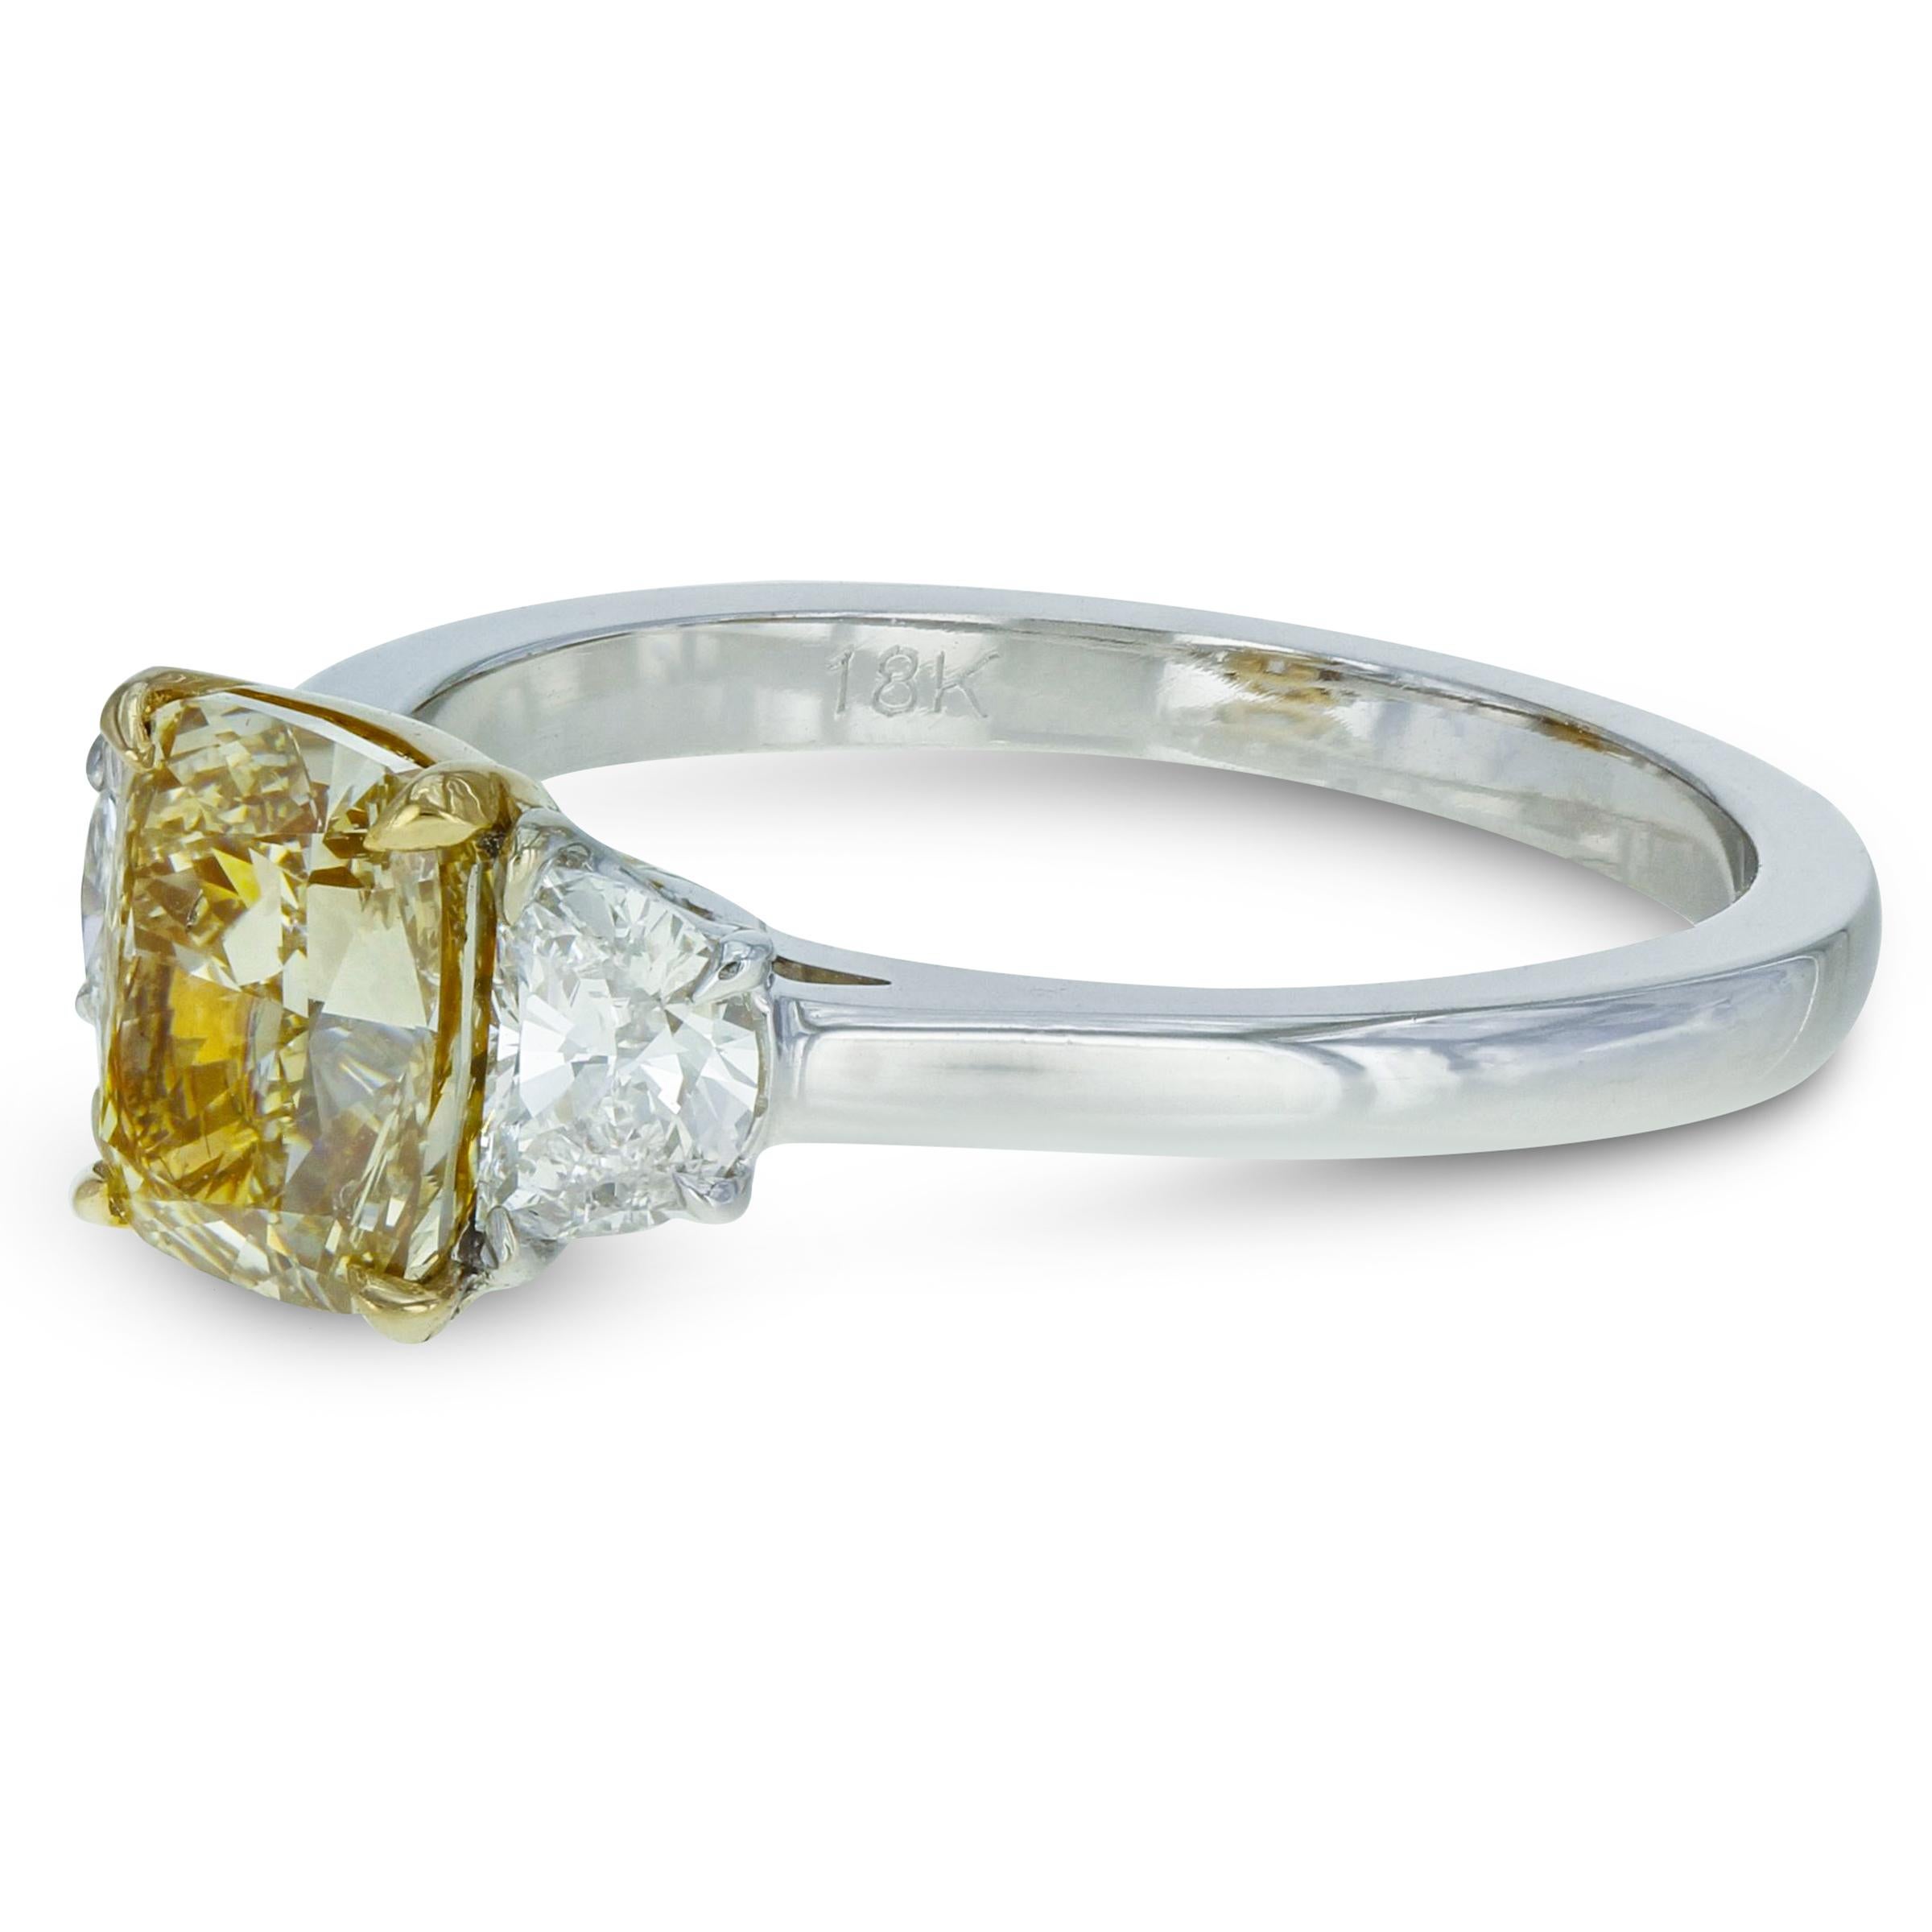 Fancy Yellow Three Stone Diamond Engagement Ring. GIA.
This rich lemon-yellow color is extraordinary: captivated in our three stone diamond engagement ring. GIA certified we guarantee quality and high end finishes. Flanked by half moon cut diamonds